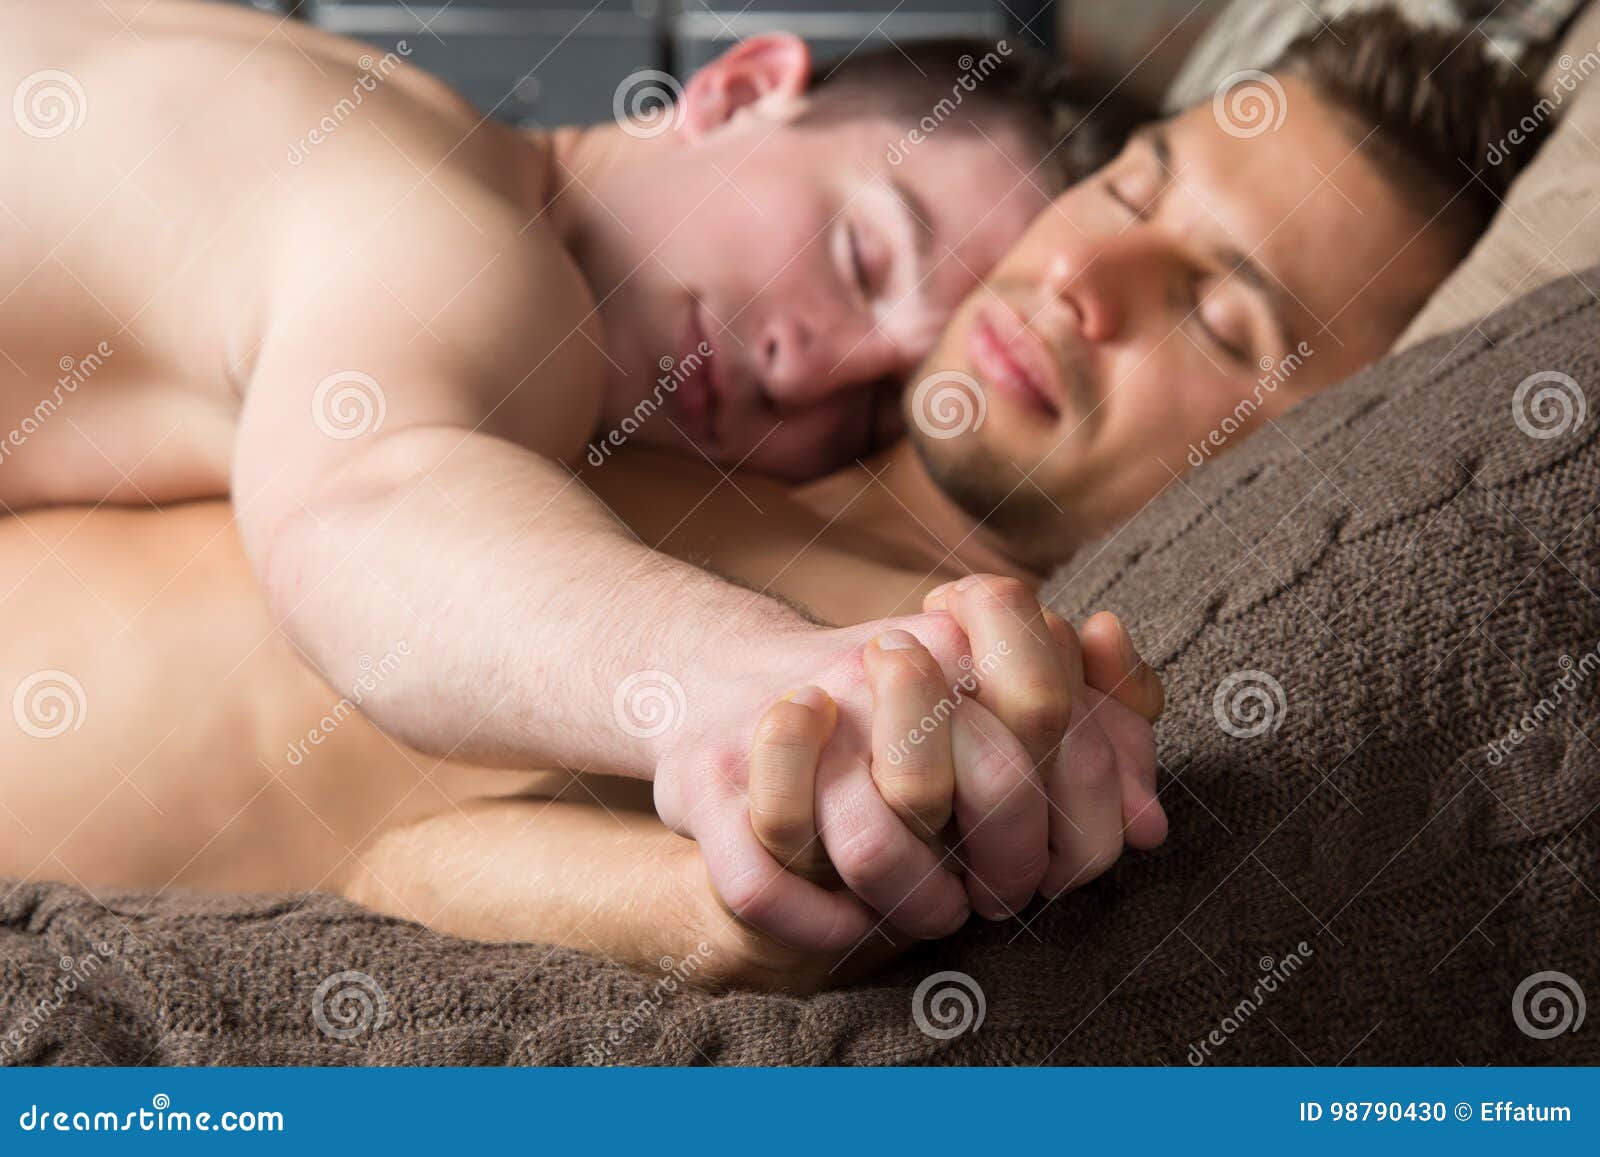 Two Guys. Love and Relationships. Sex and Passion. Tenderness and Beauty image